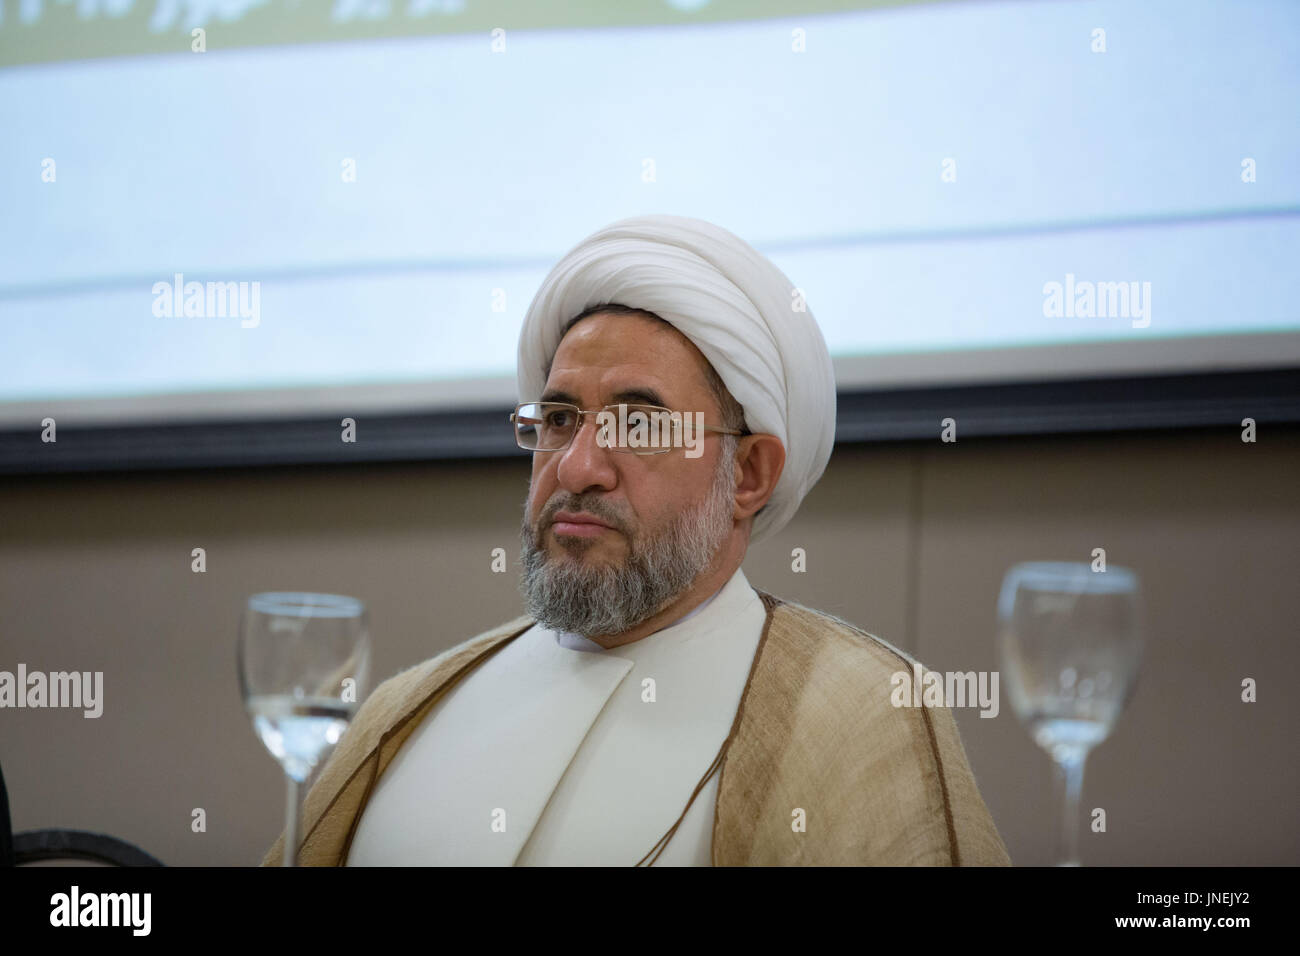 Sao Paulo, Sao Paulo, Brazil. 29th July, 2017. Iranian Ayatollah MOHSEN ARAKI, attends the event ''The Muslims and the confrontation against terrorism and radicalism'' promoted by the Islamic Center in Brazil at a hotel in Sao Paulo, Brazil on Saturday (29) Credit: Paulo Lopes/ZUMA Wire/Alamy Live News Stock Photo